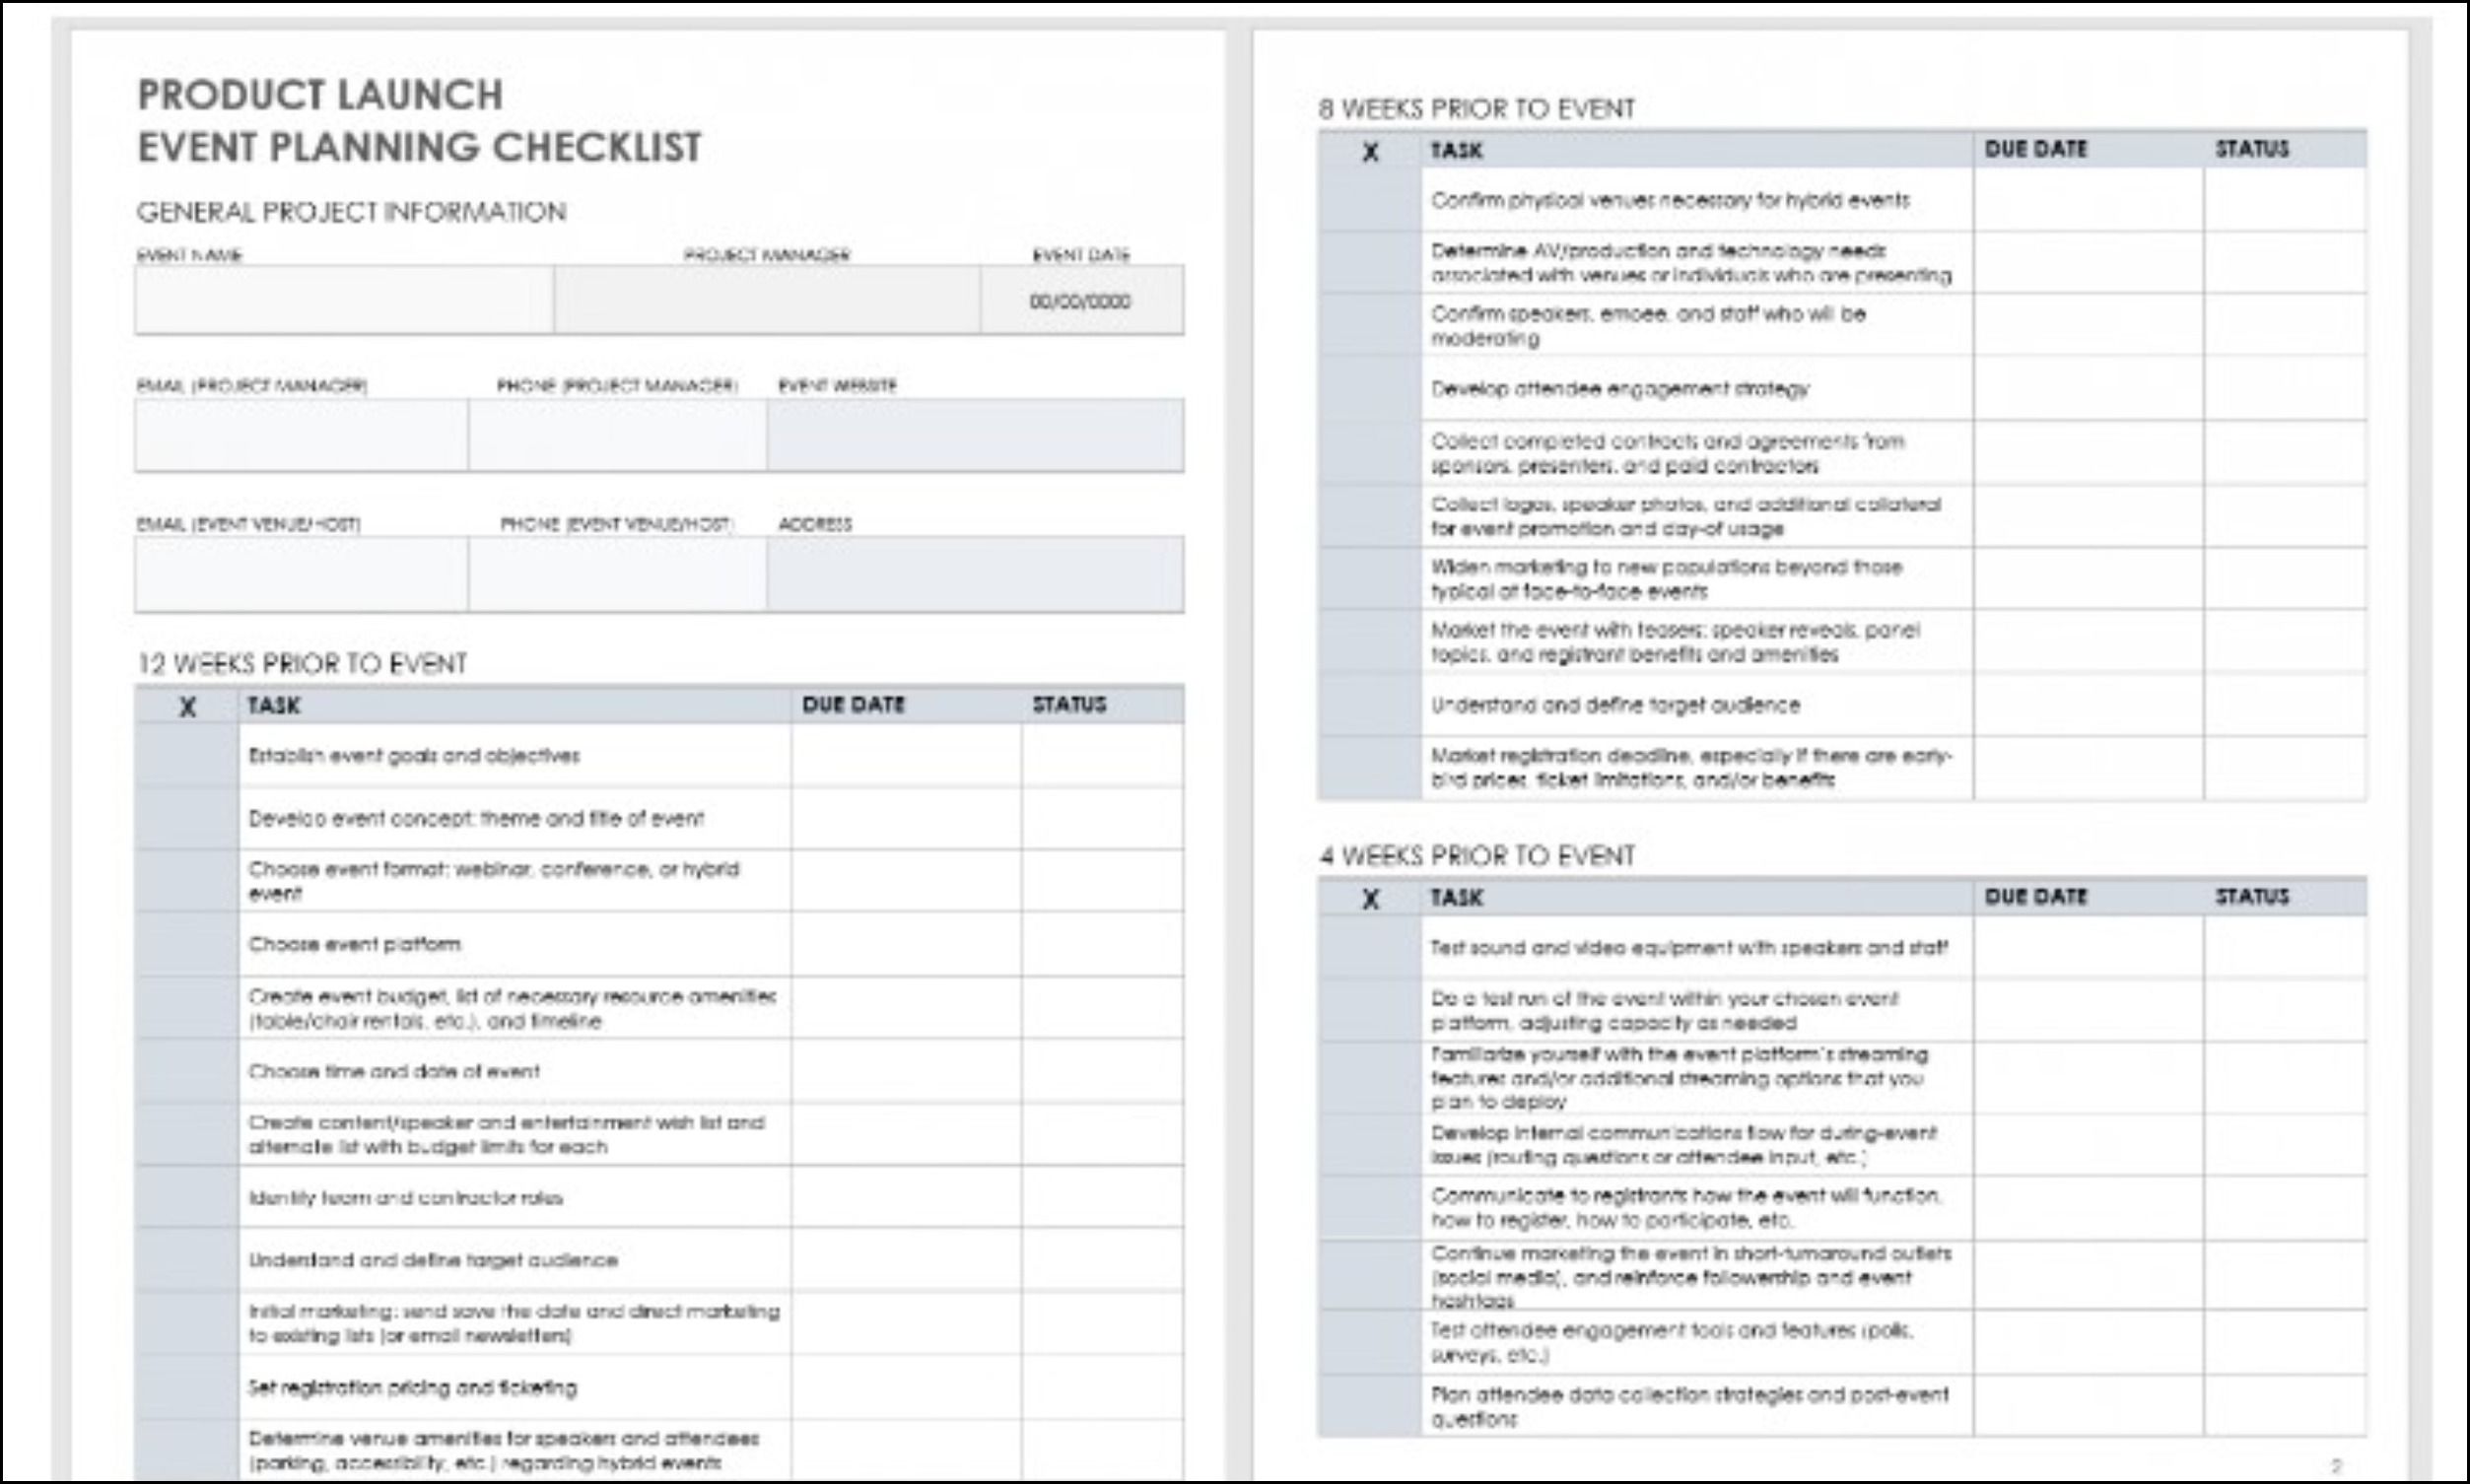 Product launch event planning checklist